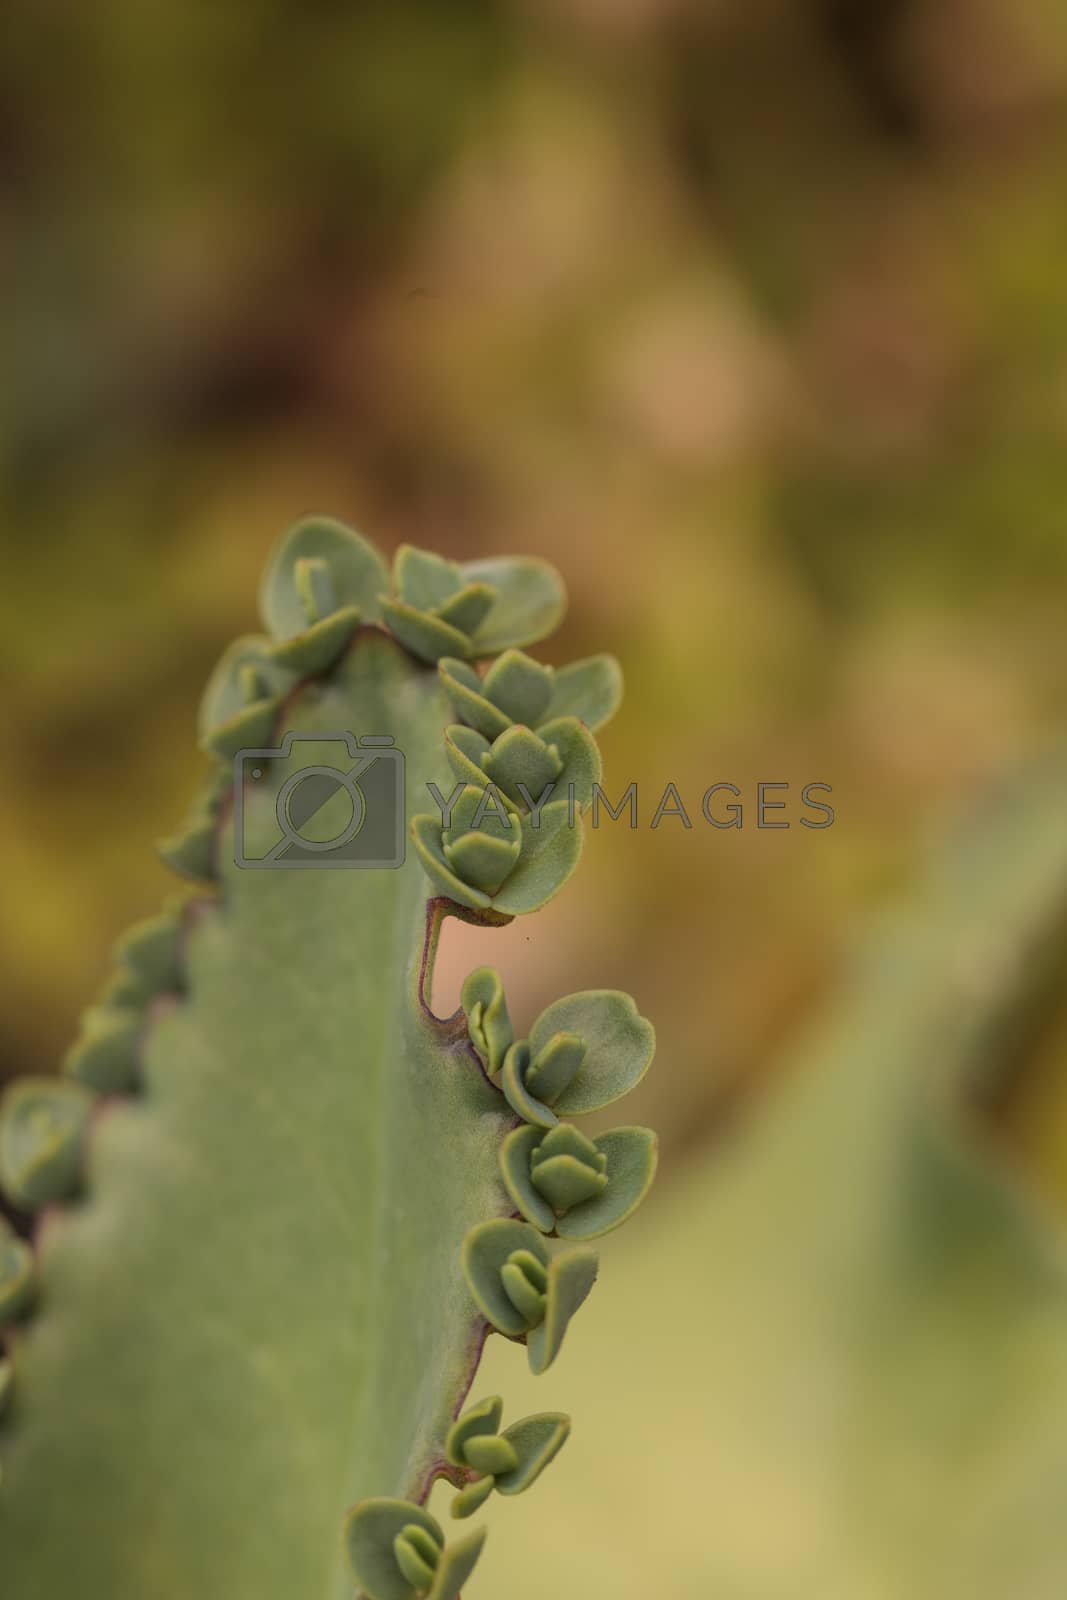 Royalty free image of Mother of millions, scientifically called Bryophyllum daigremontianum by steffstarr